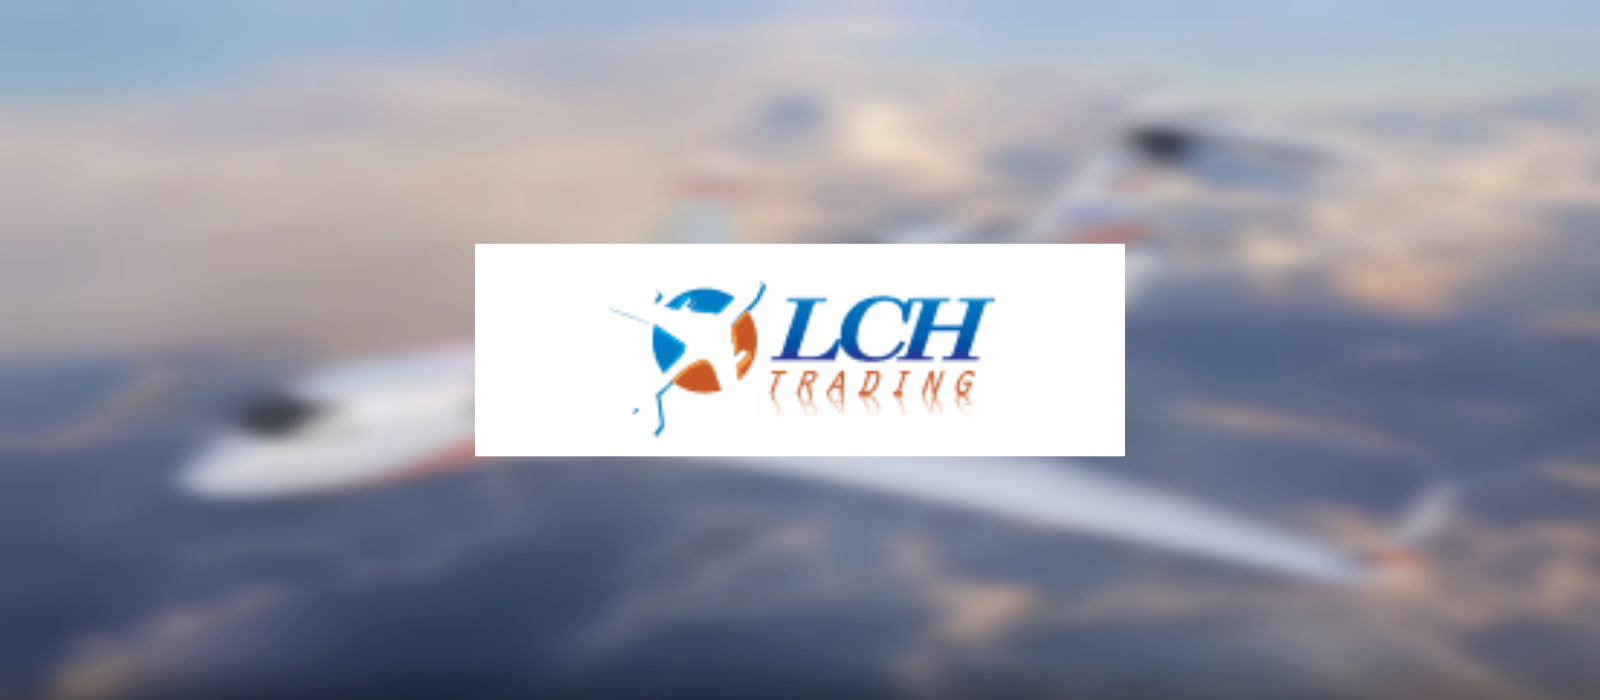 HGP & Cloud Announce Inventory Liquidation Auction from LCH Aerospace